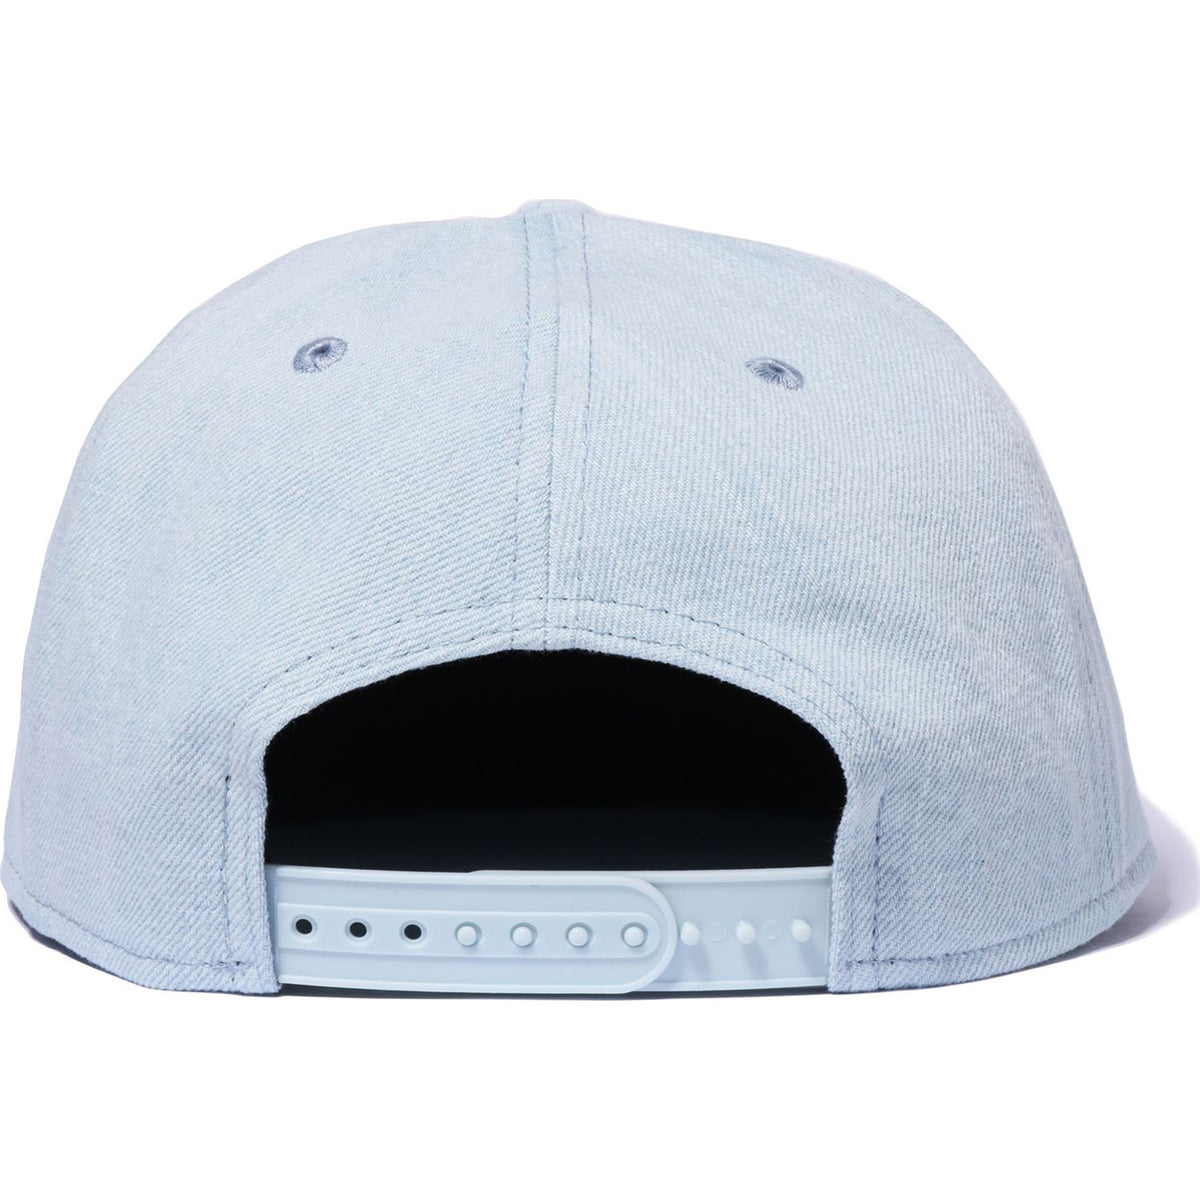 LEATHER PATCH NEW ERA 9FIFTY SNAP BACK CAP MENS